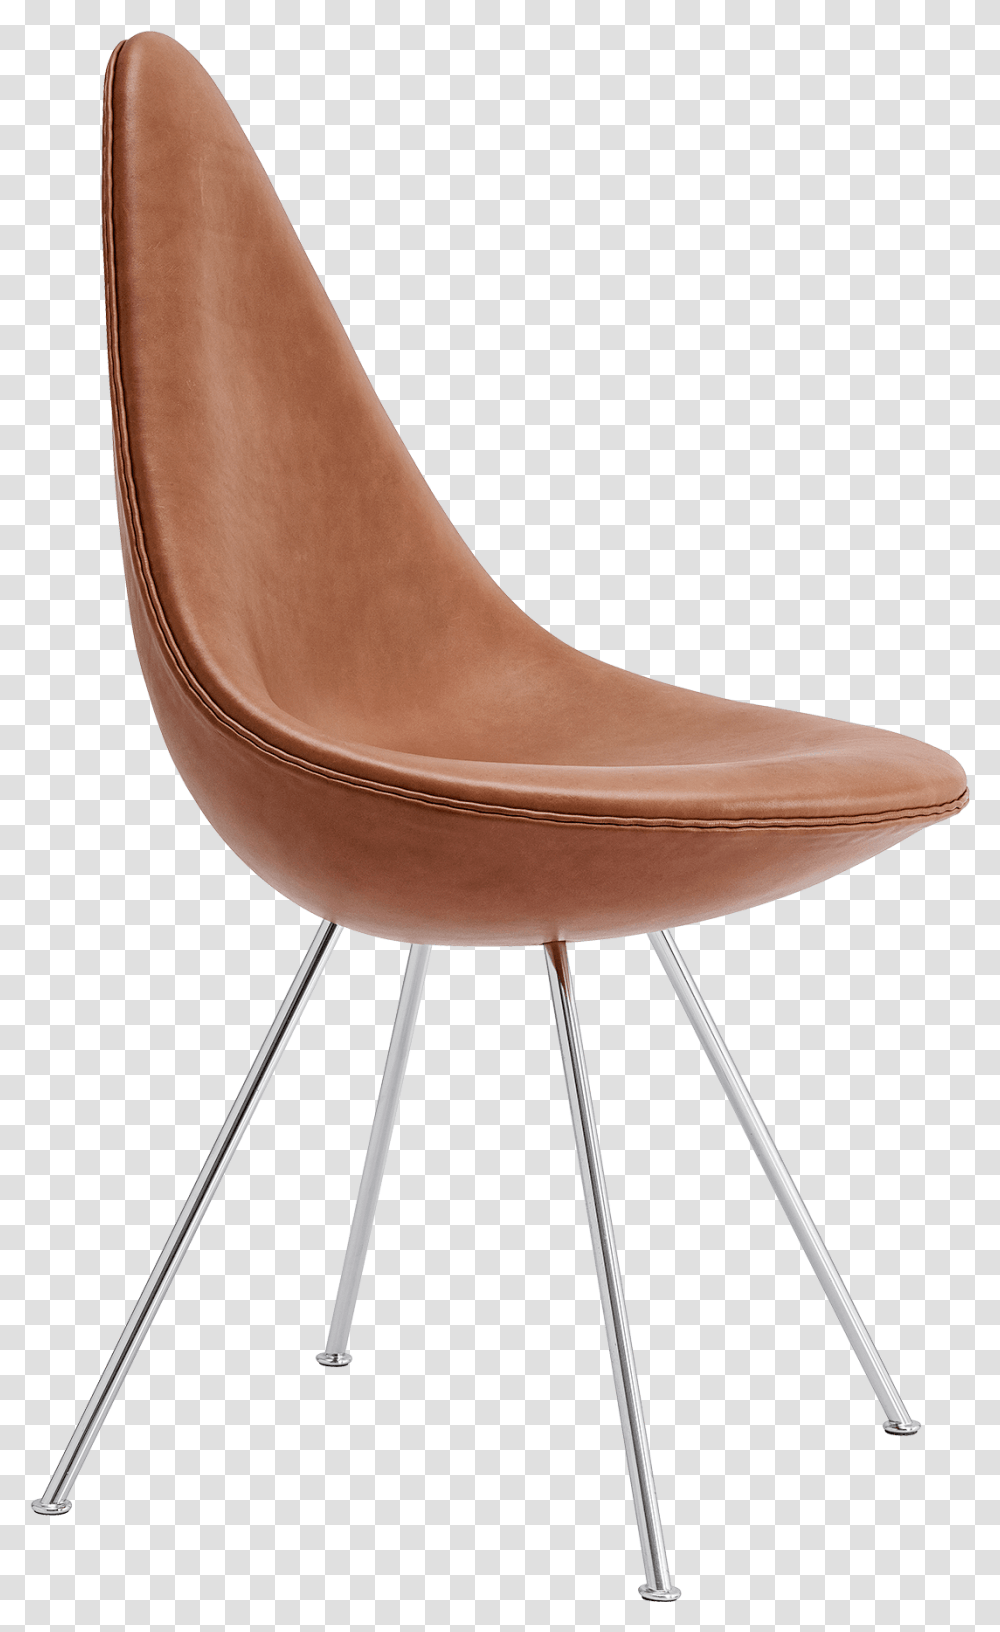 The Drop Chair Arne Jacobsen Upholstered Elegance Leather Drop Chair Arne Jacobsen, Furniture, Wood, Plywood, Canvas Transparent Png